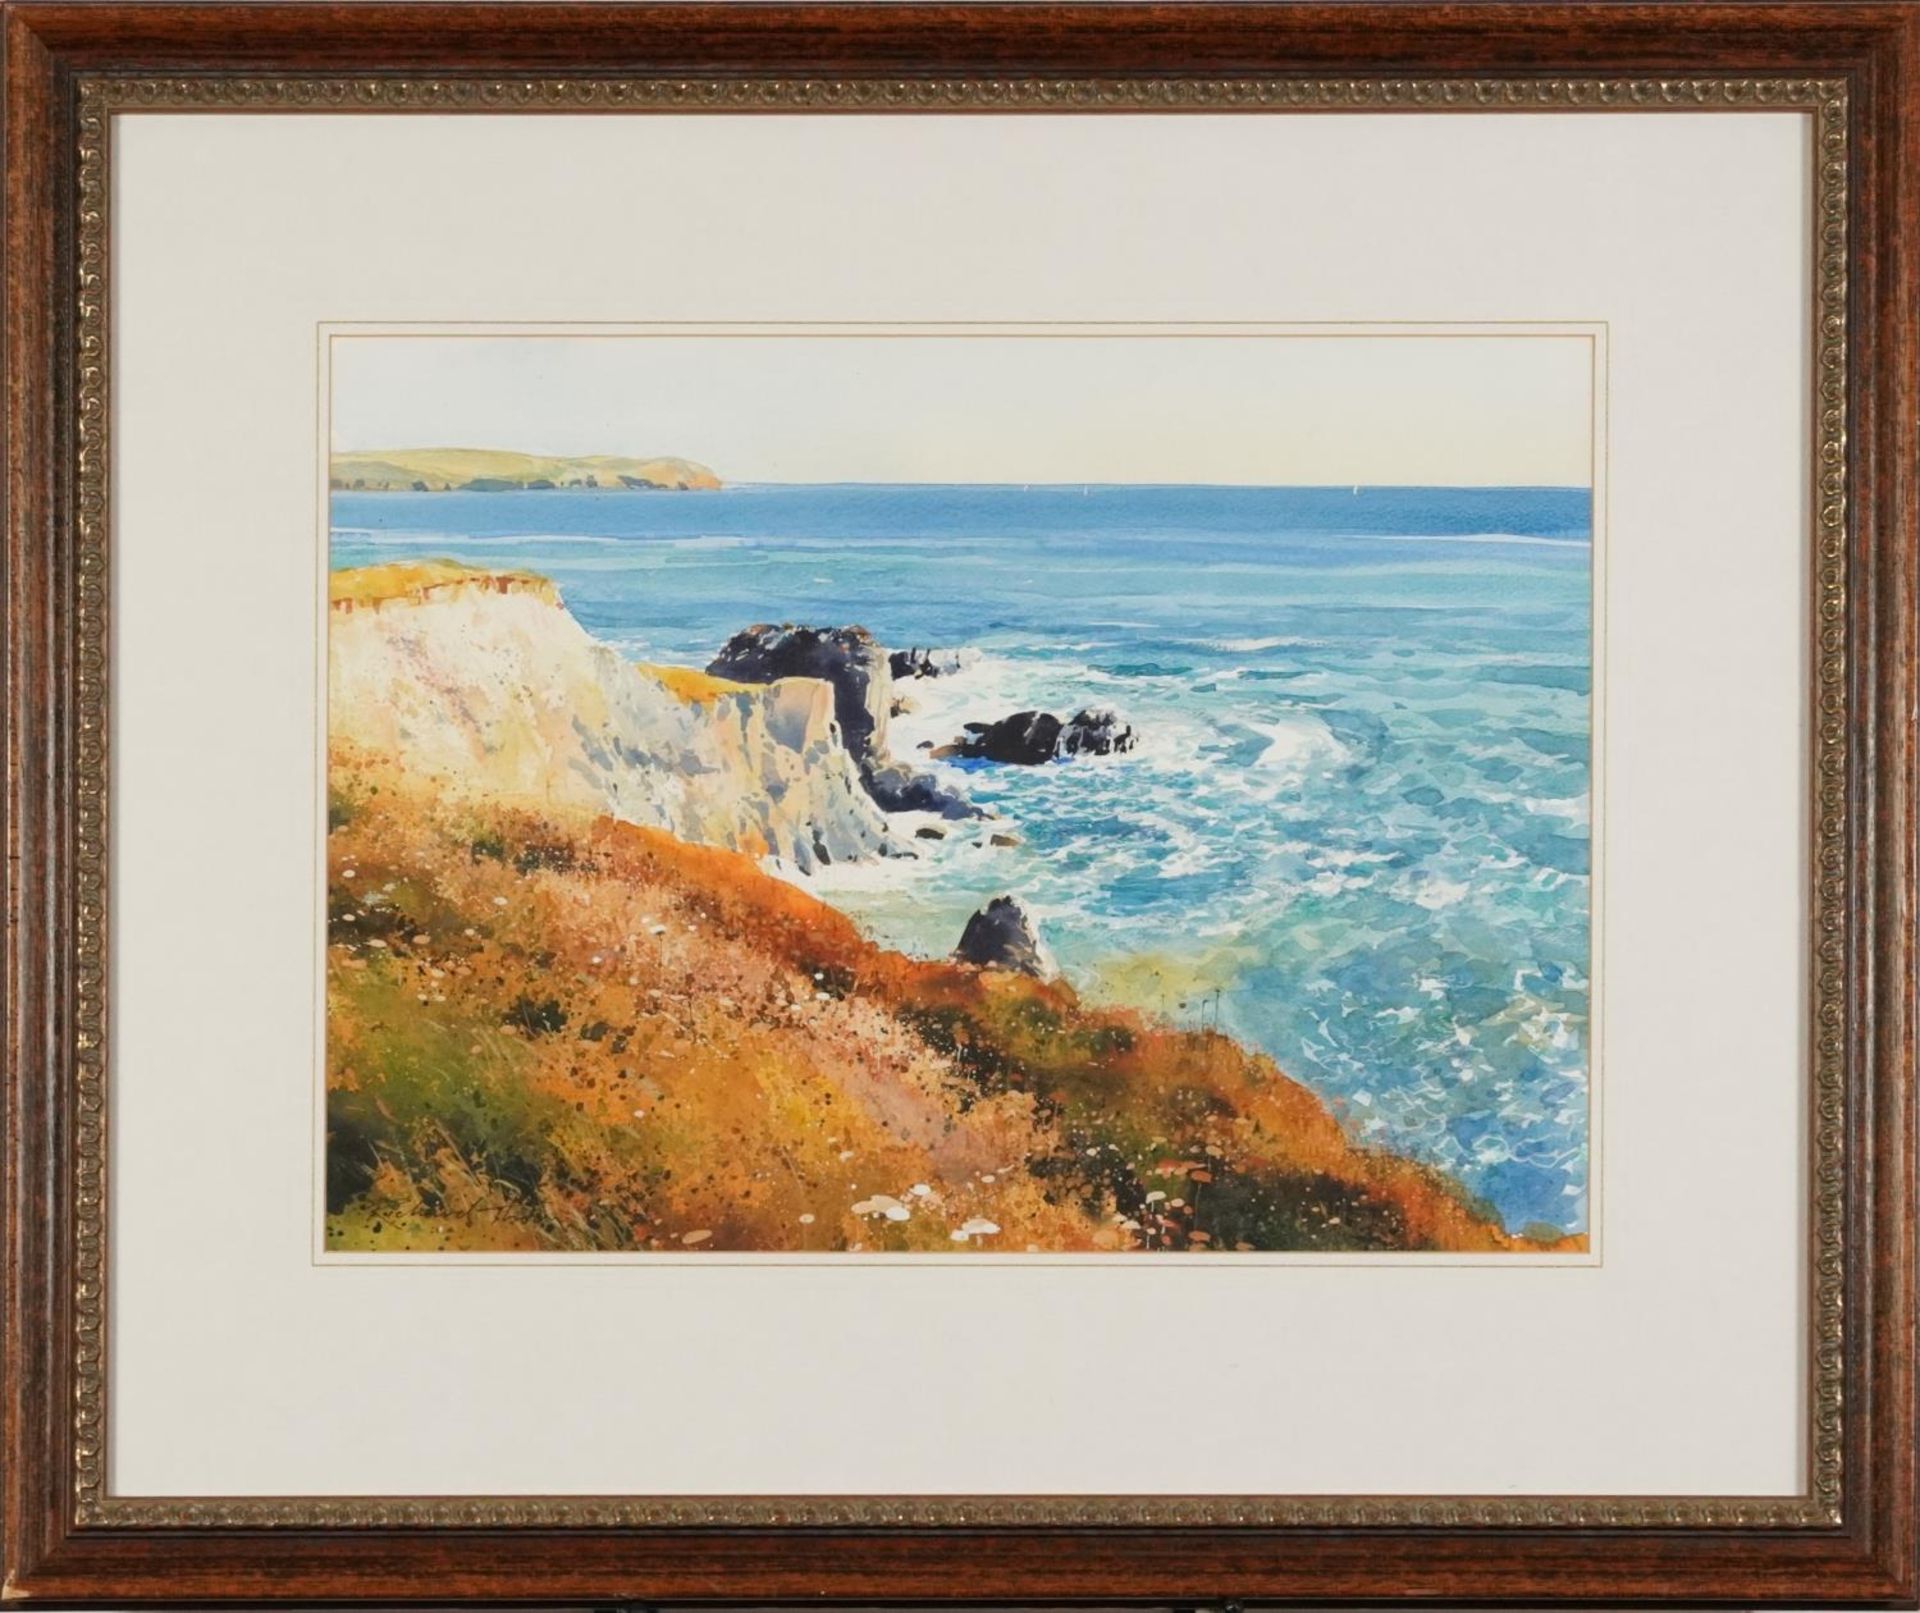 Richard Thorn - Surf at Warren Point, watercolour, The Bourne Gallery label verso, mounted, framed - Image 2 of 5